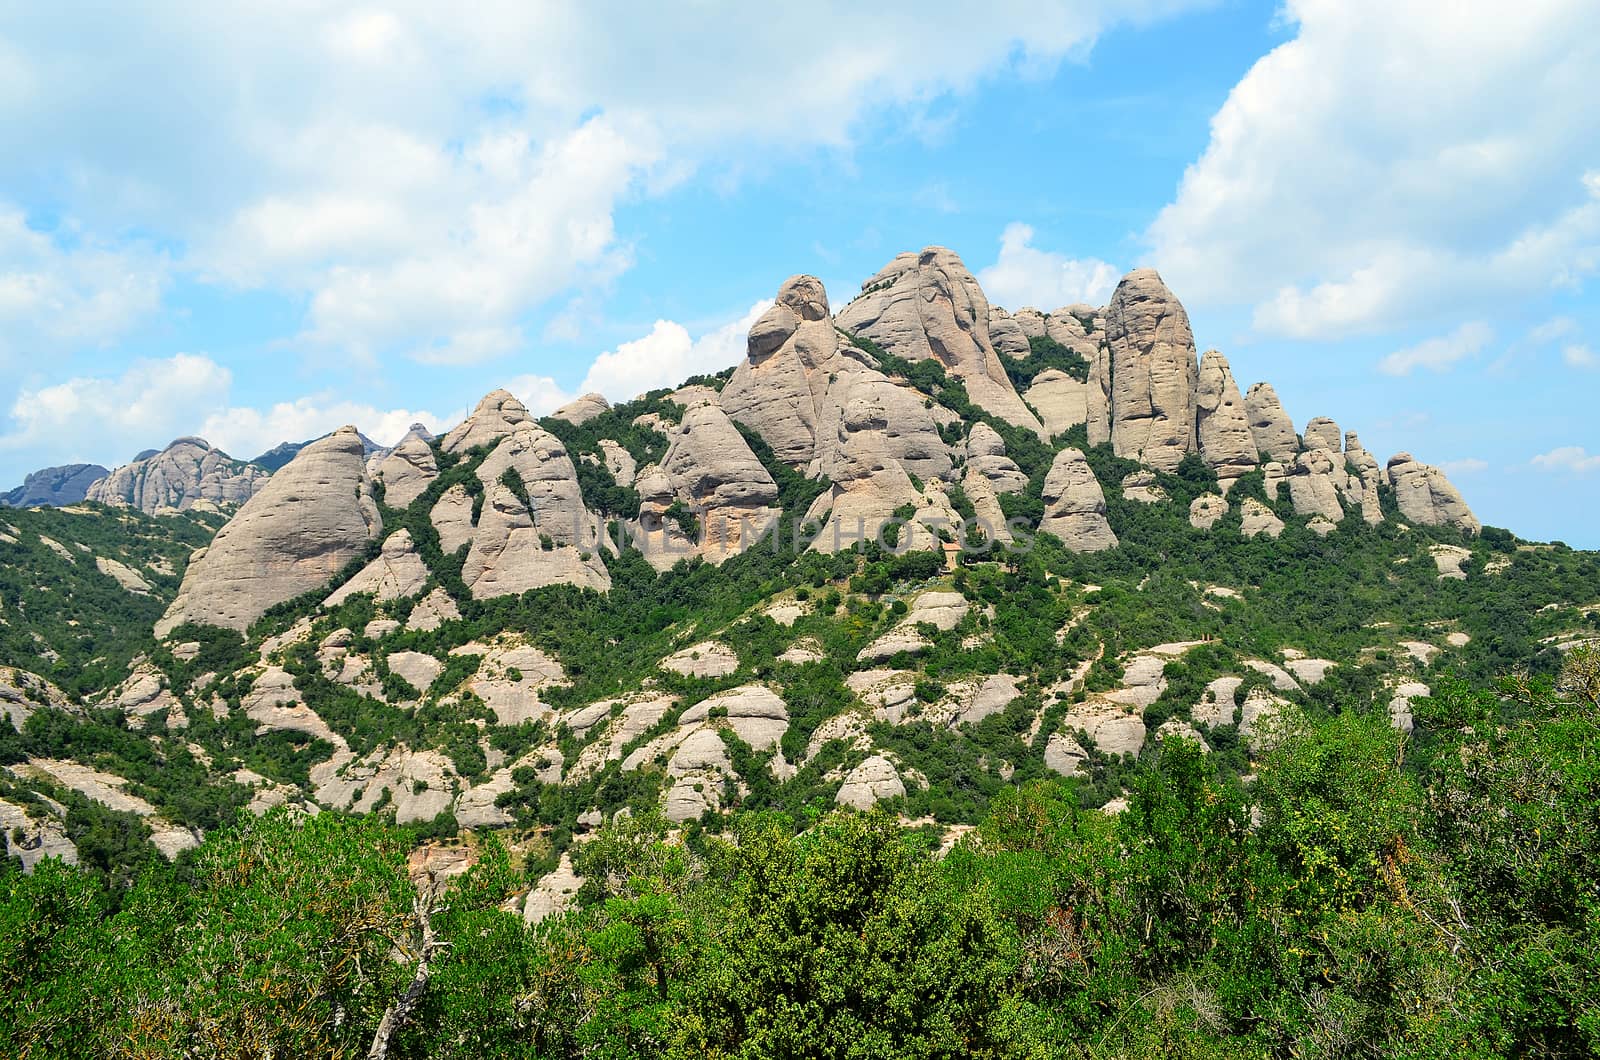 Montserrat is a multi-peaked mountain located near the city of Barcelona, in Catalonia.  "Montserrat" literally means "saw mountain" in Catalan.